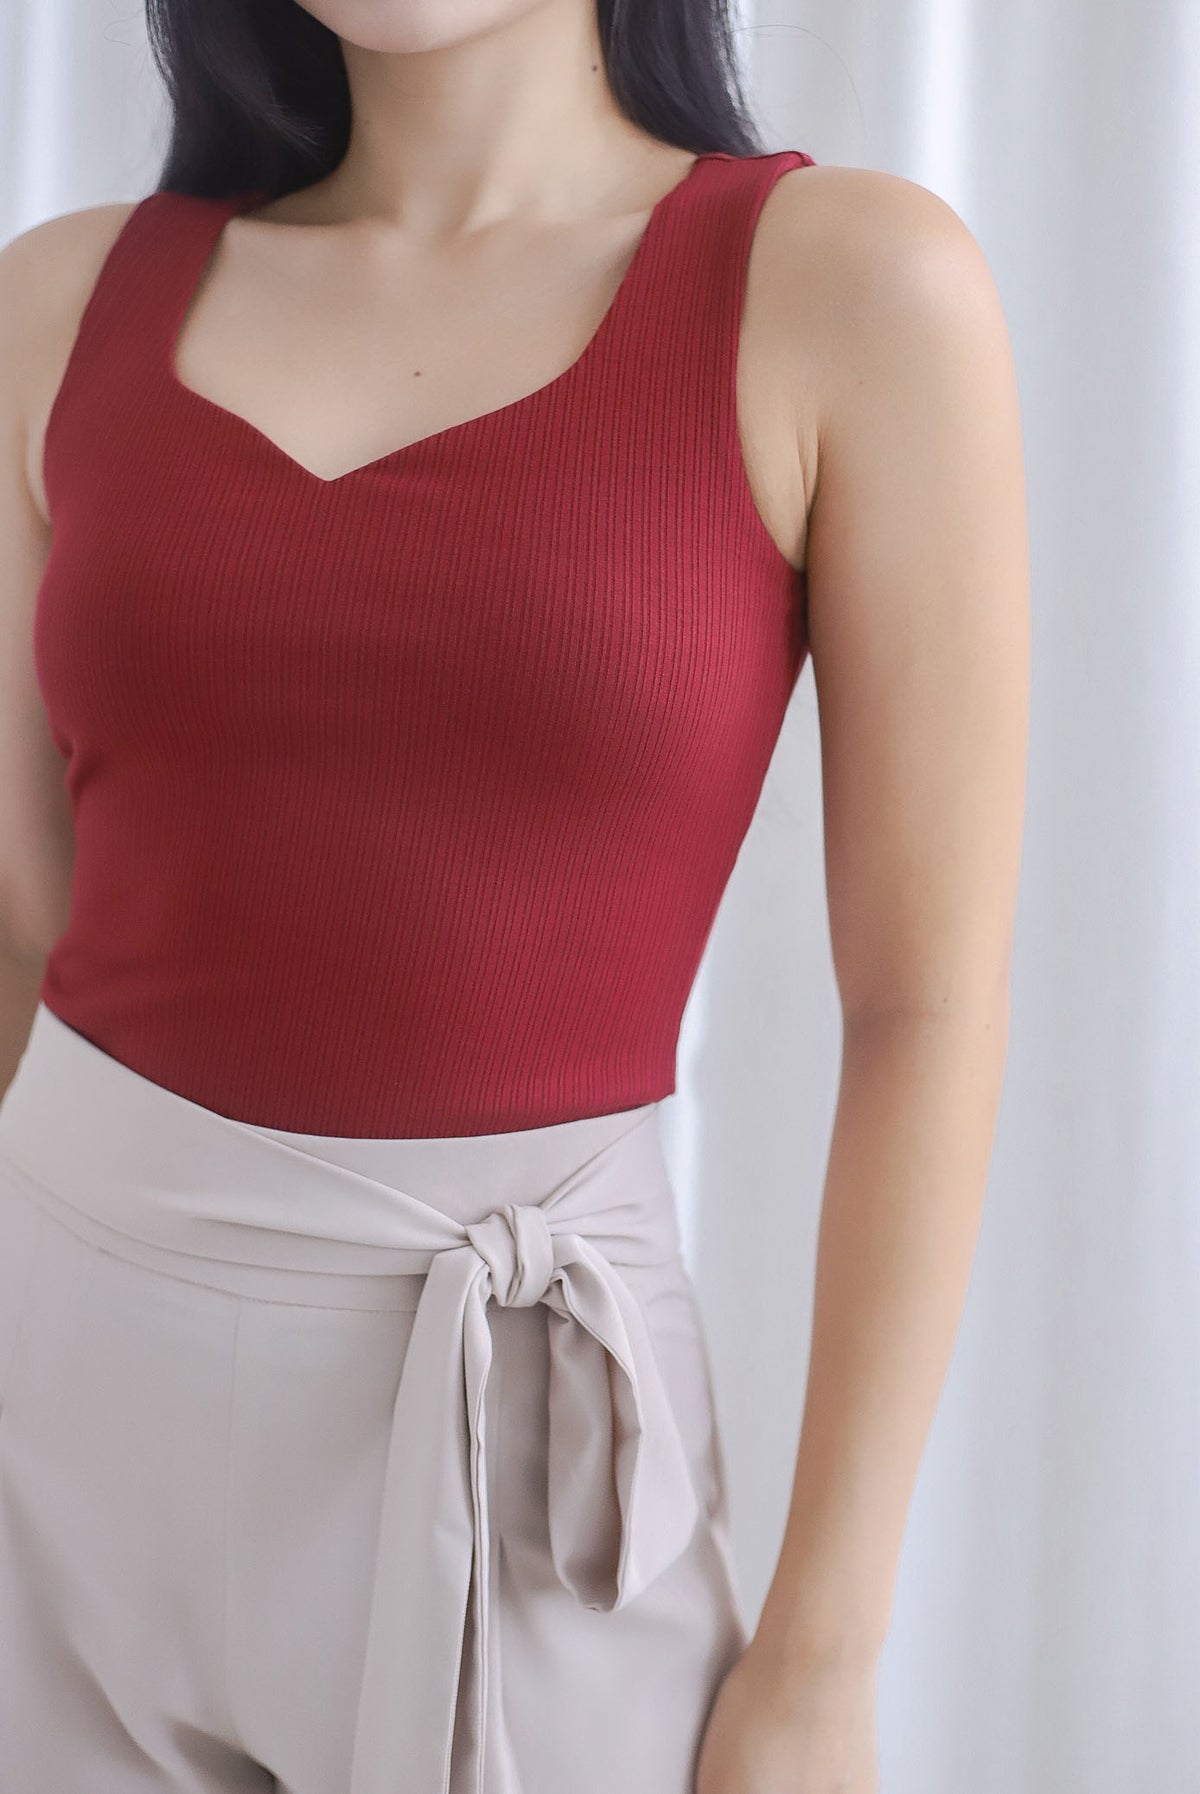 TDC Karin Sweetheart Top In Wine Red